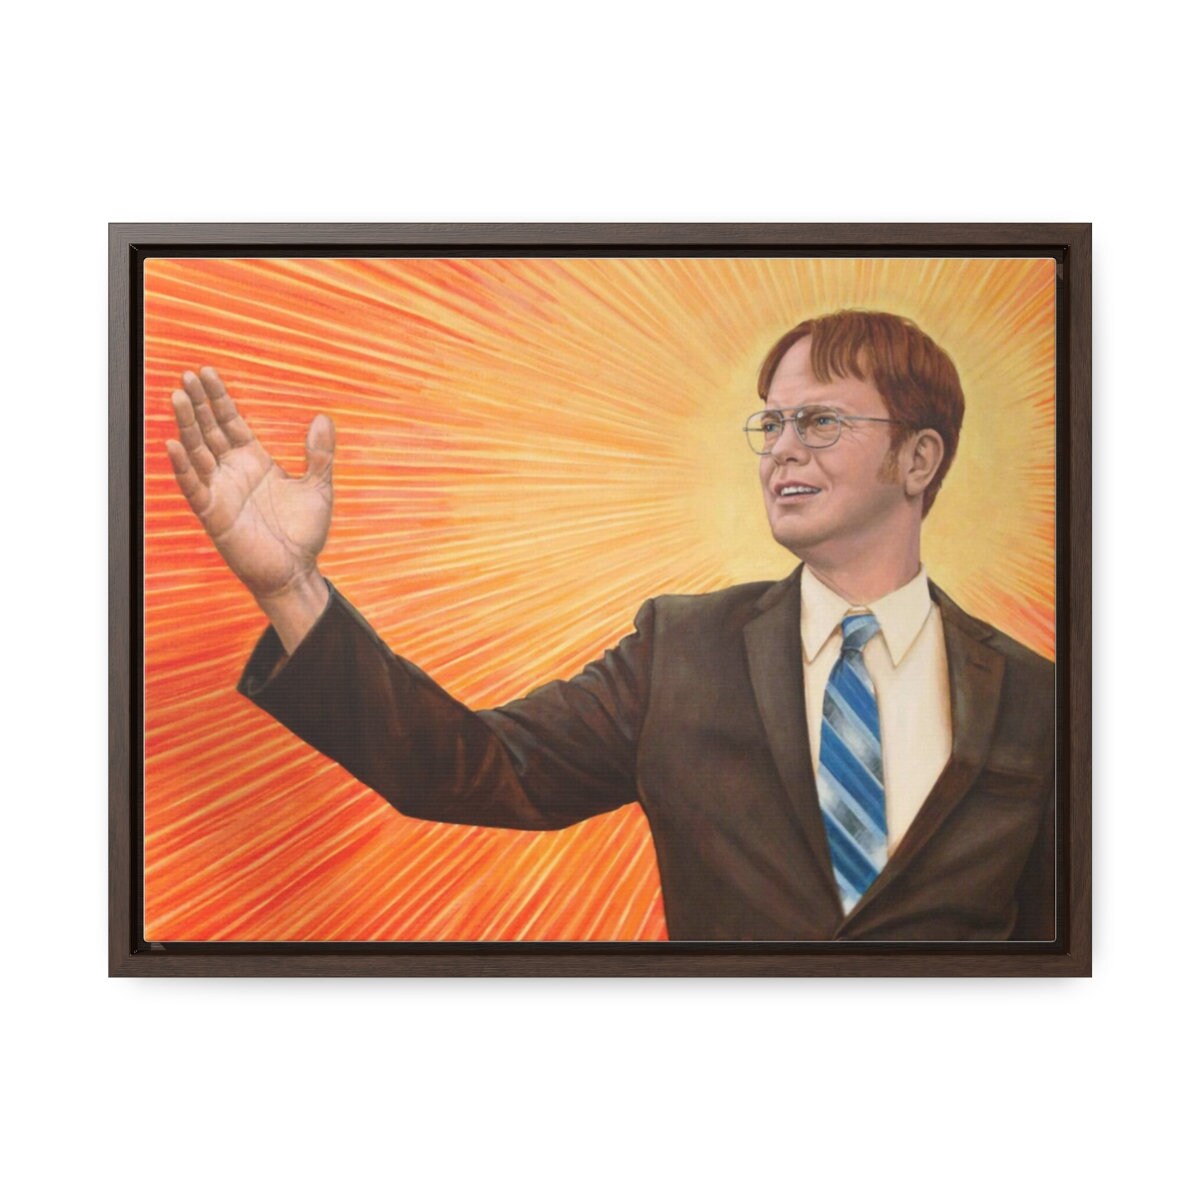 Dwight painting the office